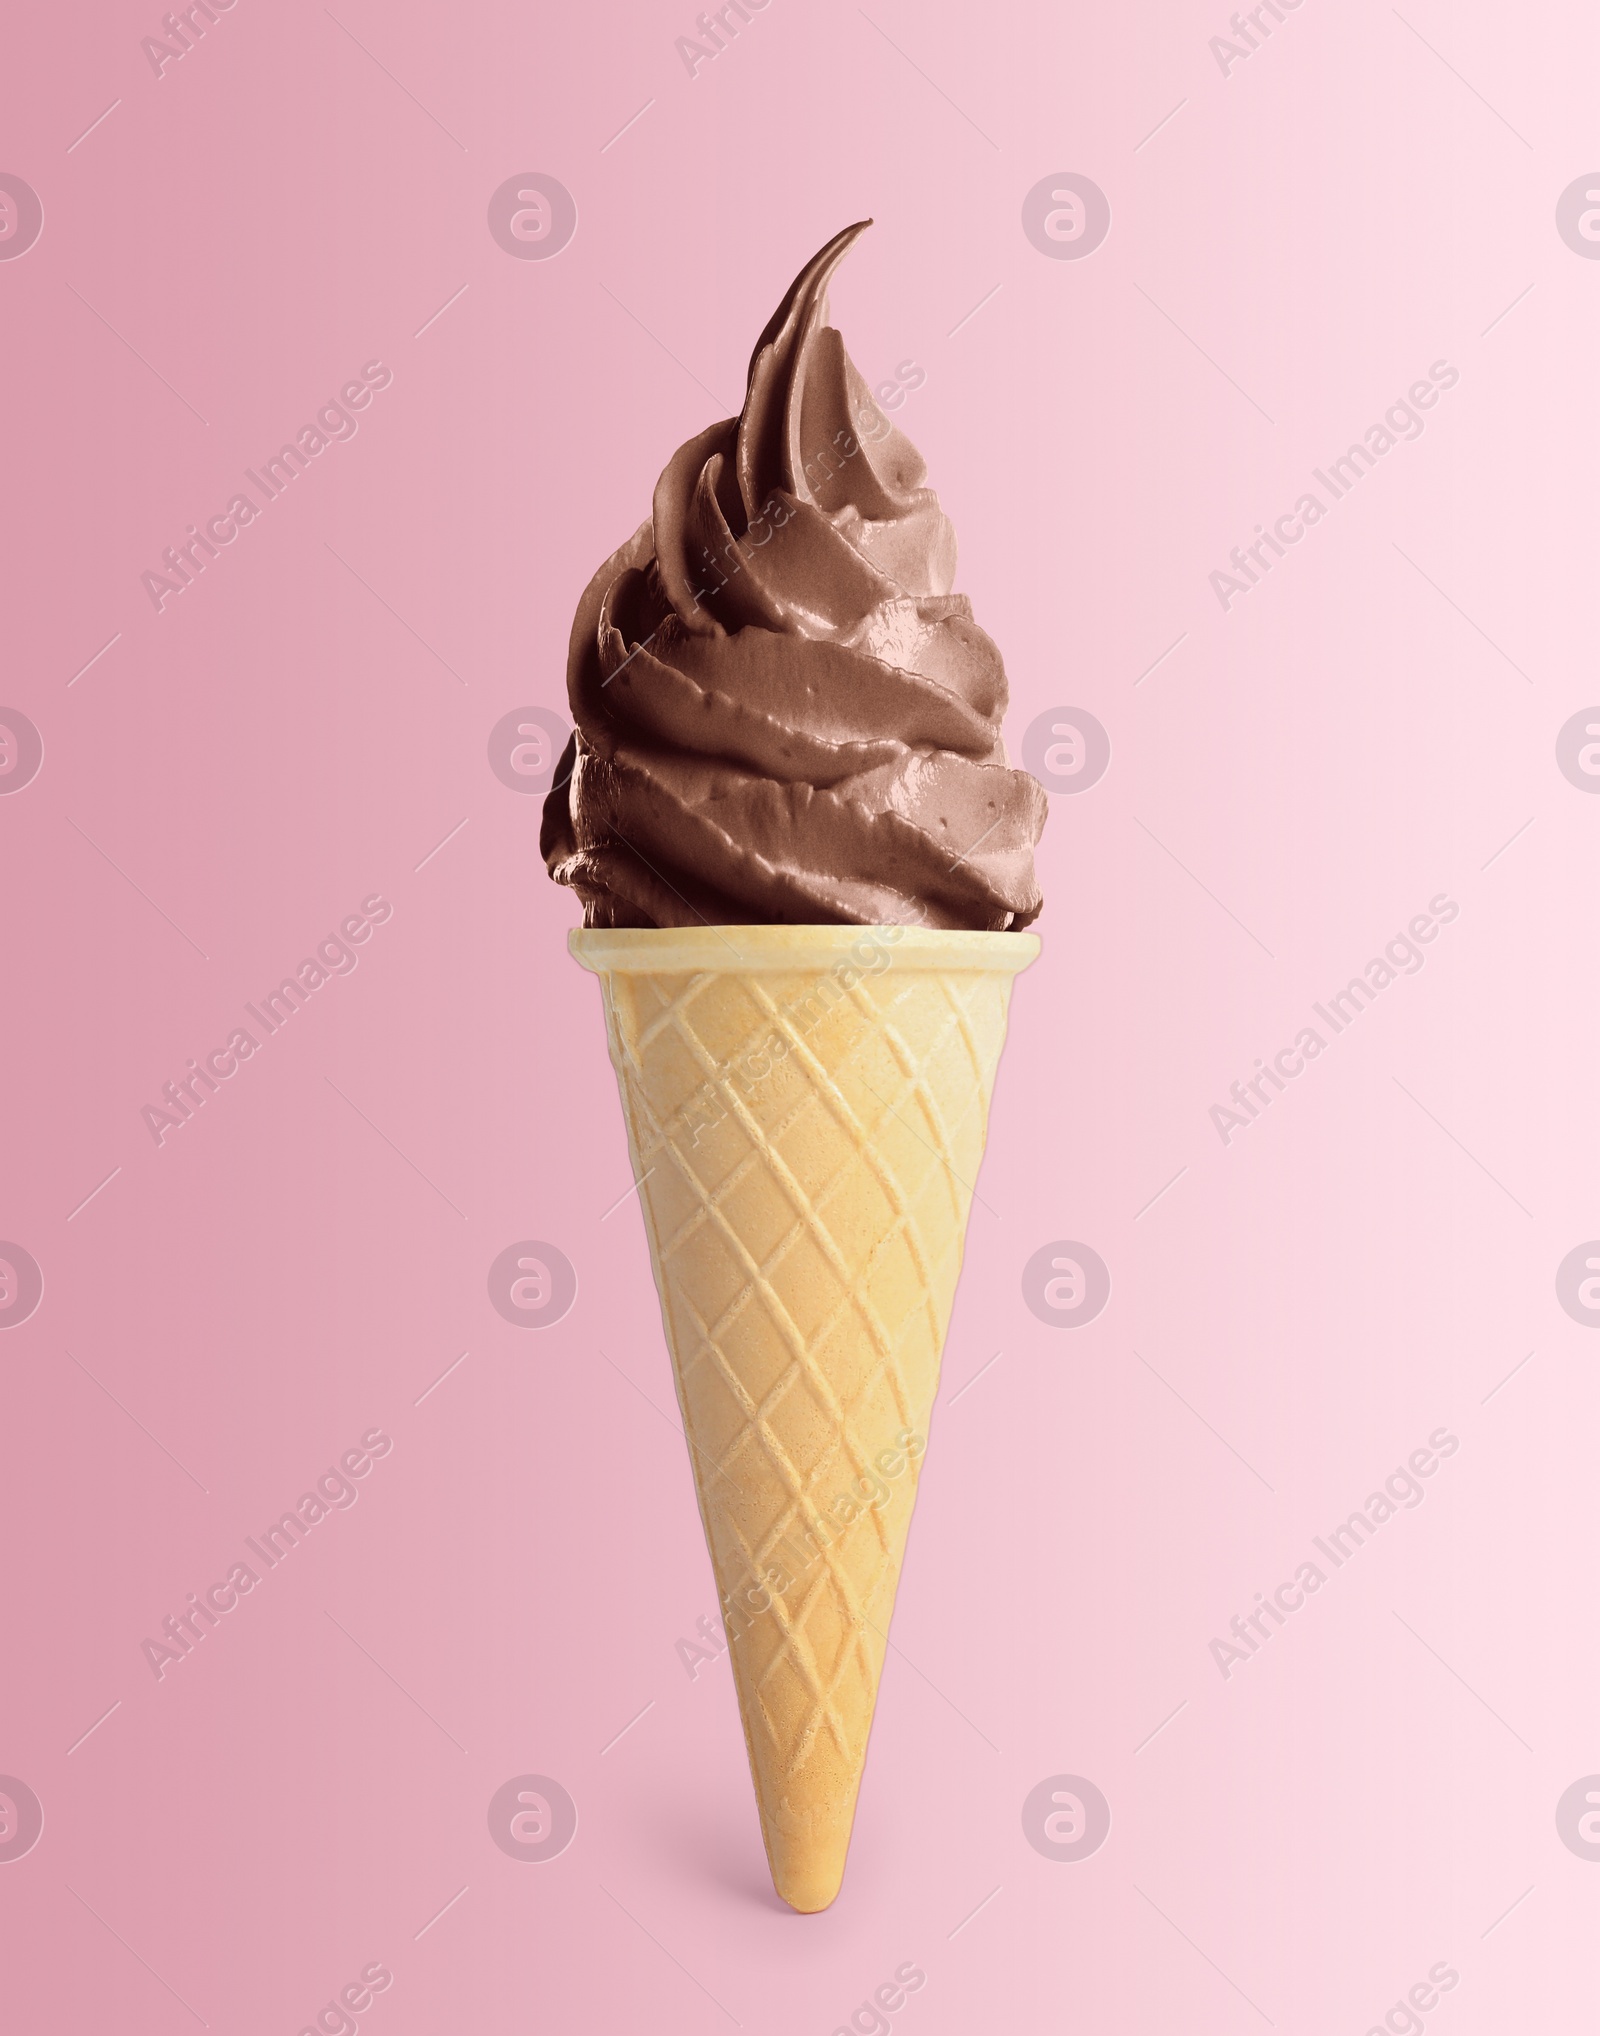 Image of Delicious soft serve chocolate ice cream in crispy cone on pastel pink background